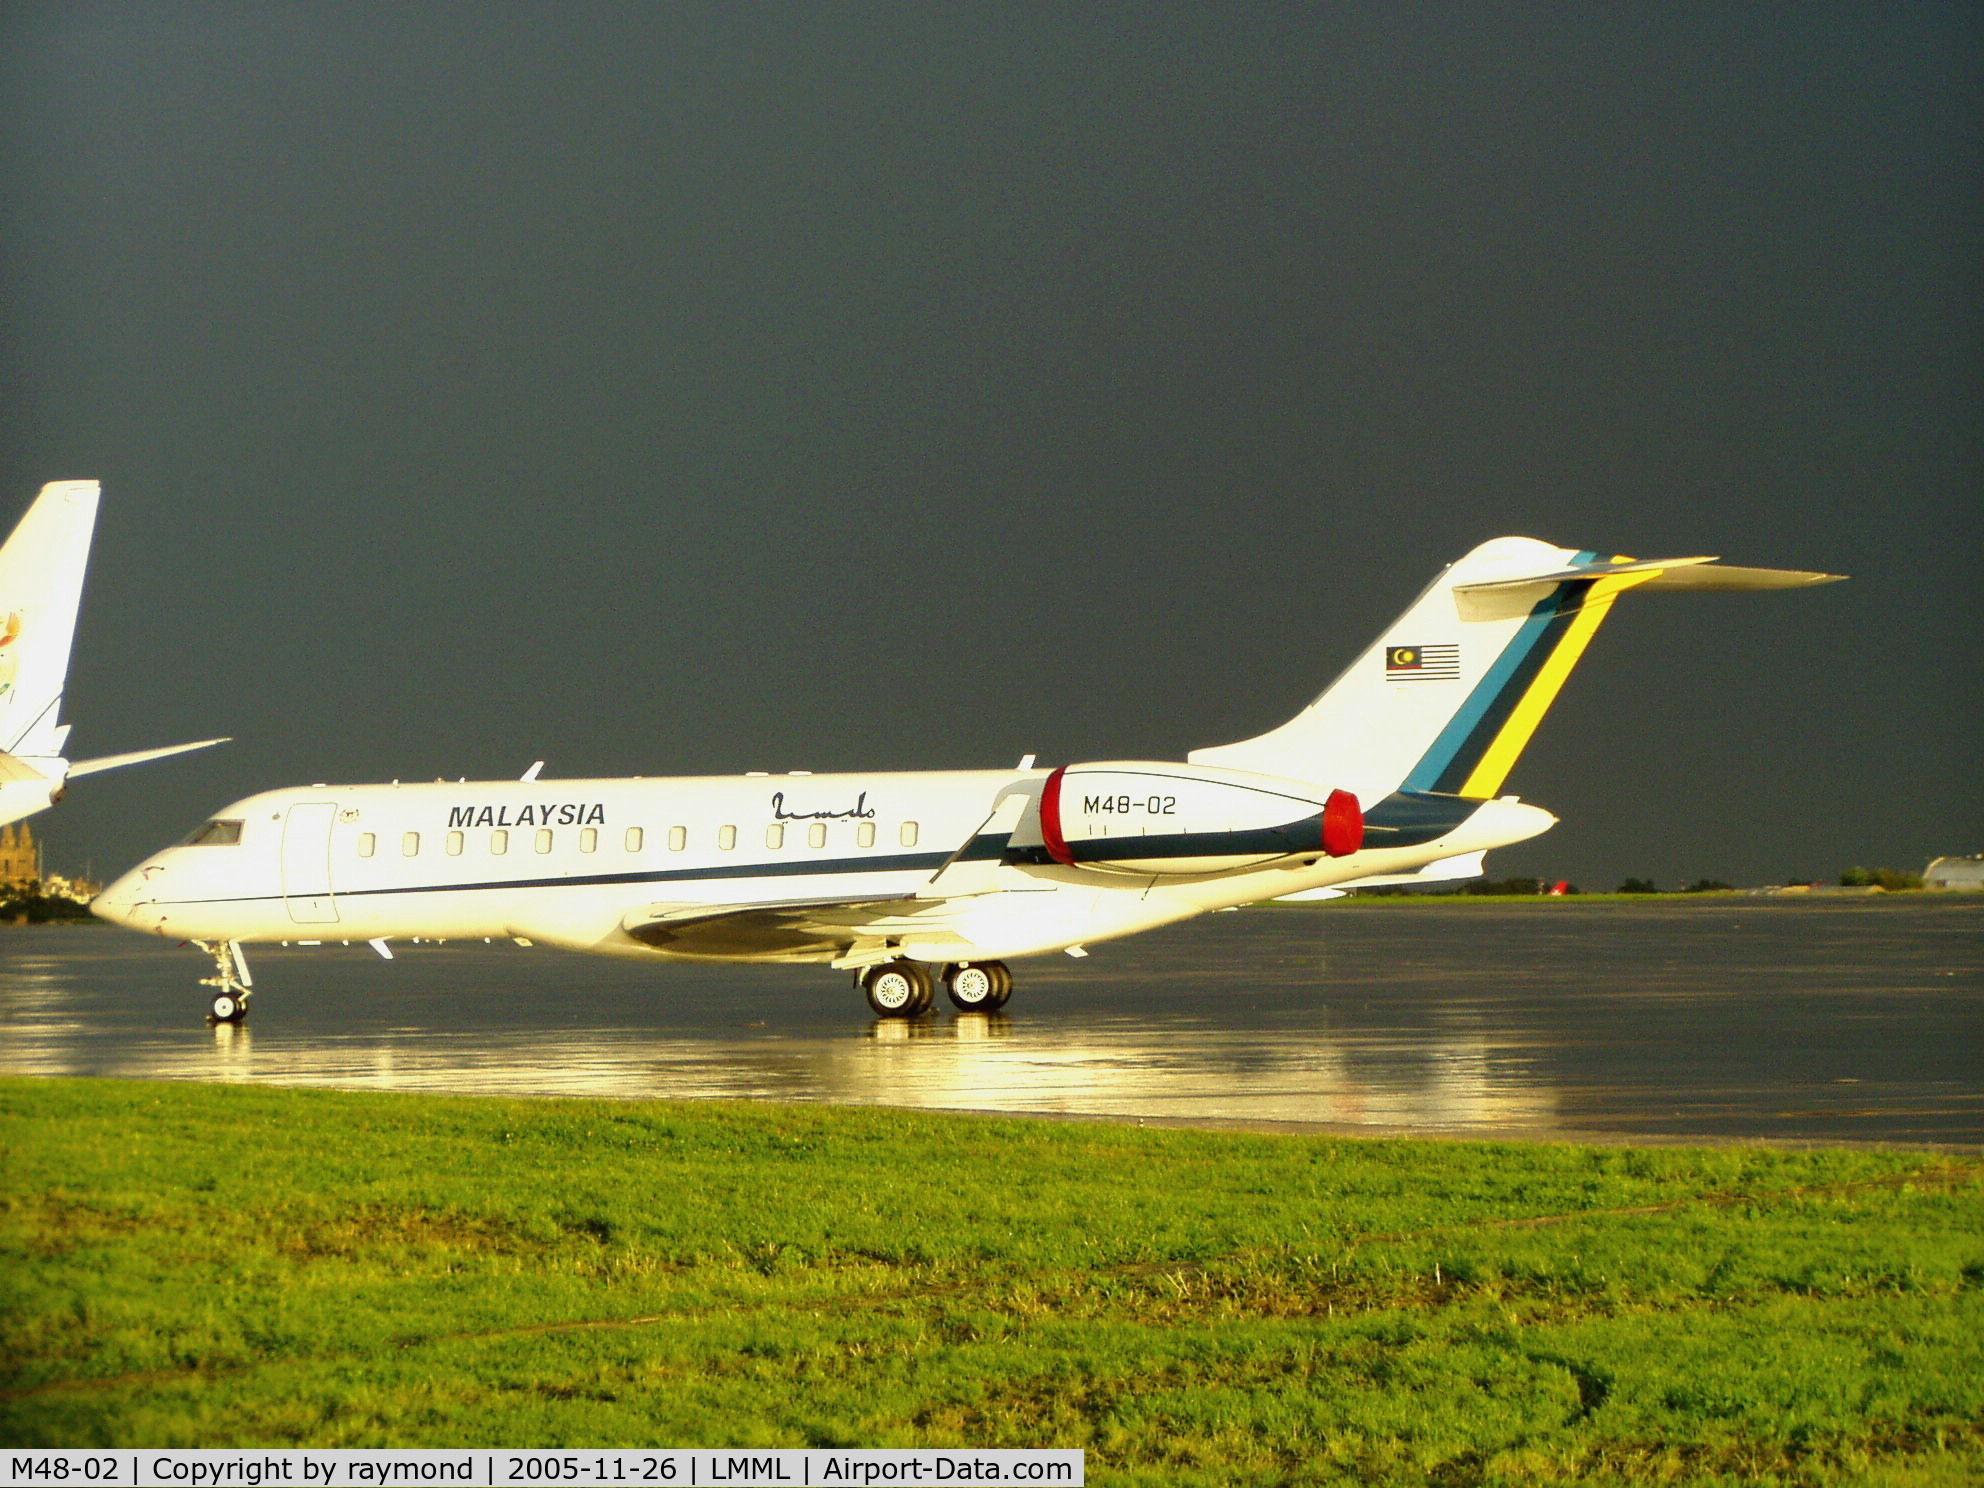 M48-02, 2001 Bombardier BD-700-1A10 Global Express C/N 9096, Bombardier M48-02 Malaysian Air Force